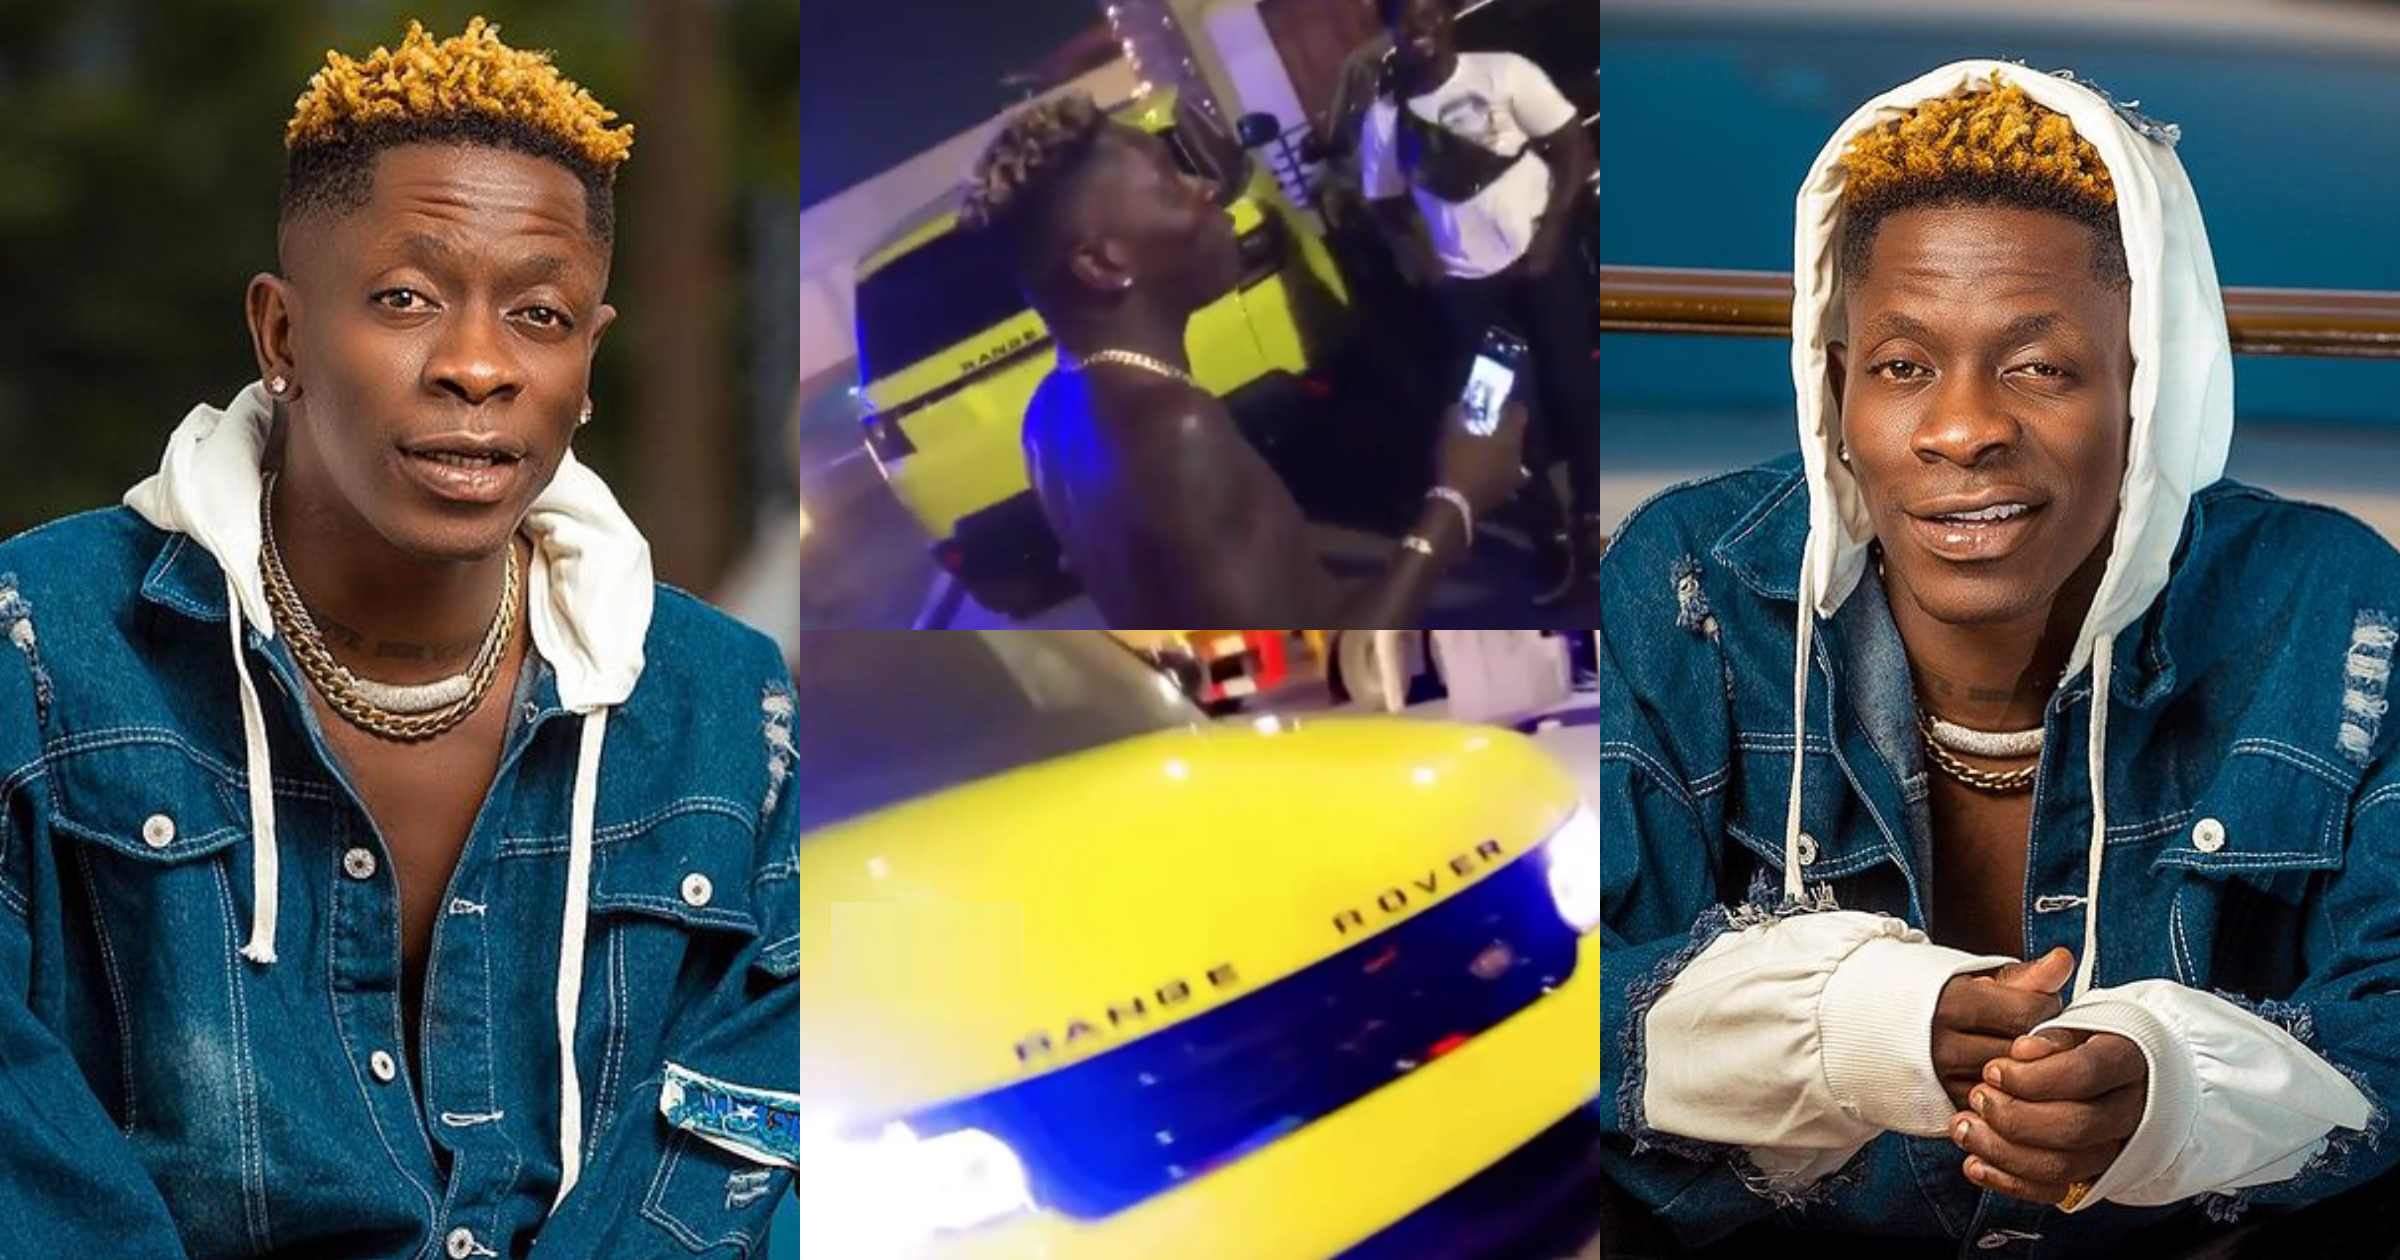 Shatta Wale releases a yellow Range Rover; flaunts it in new video